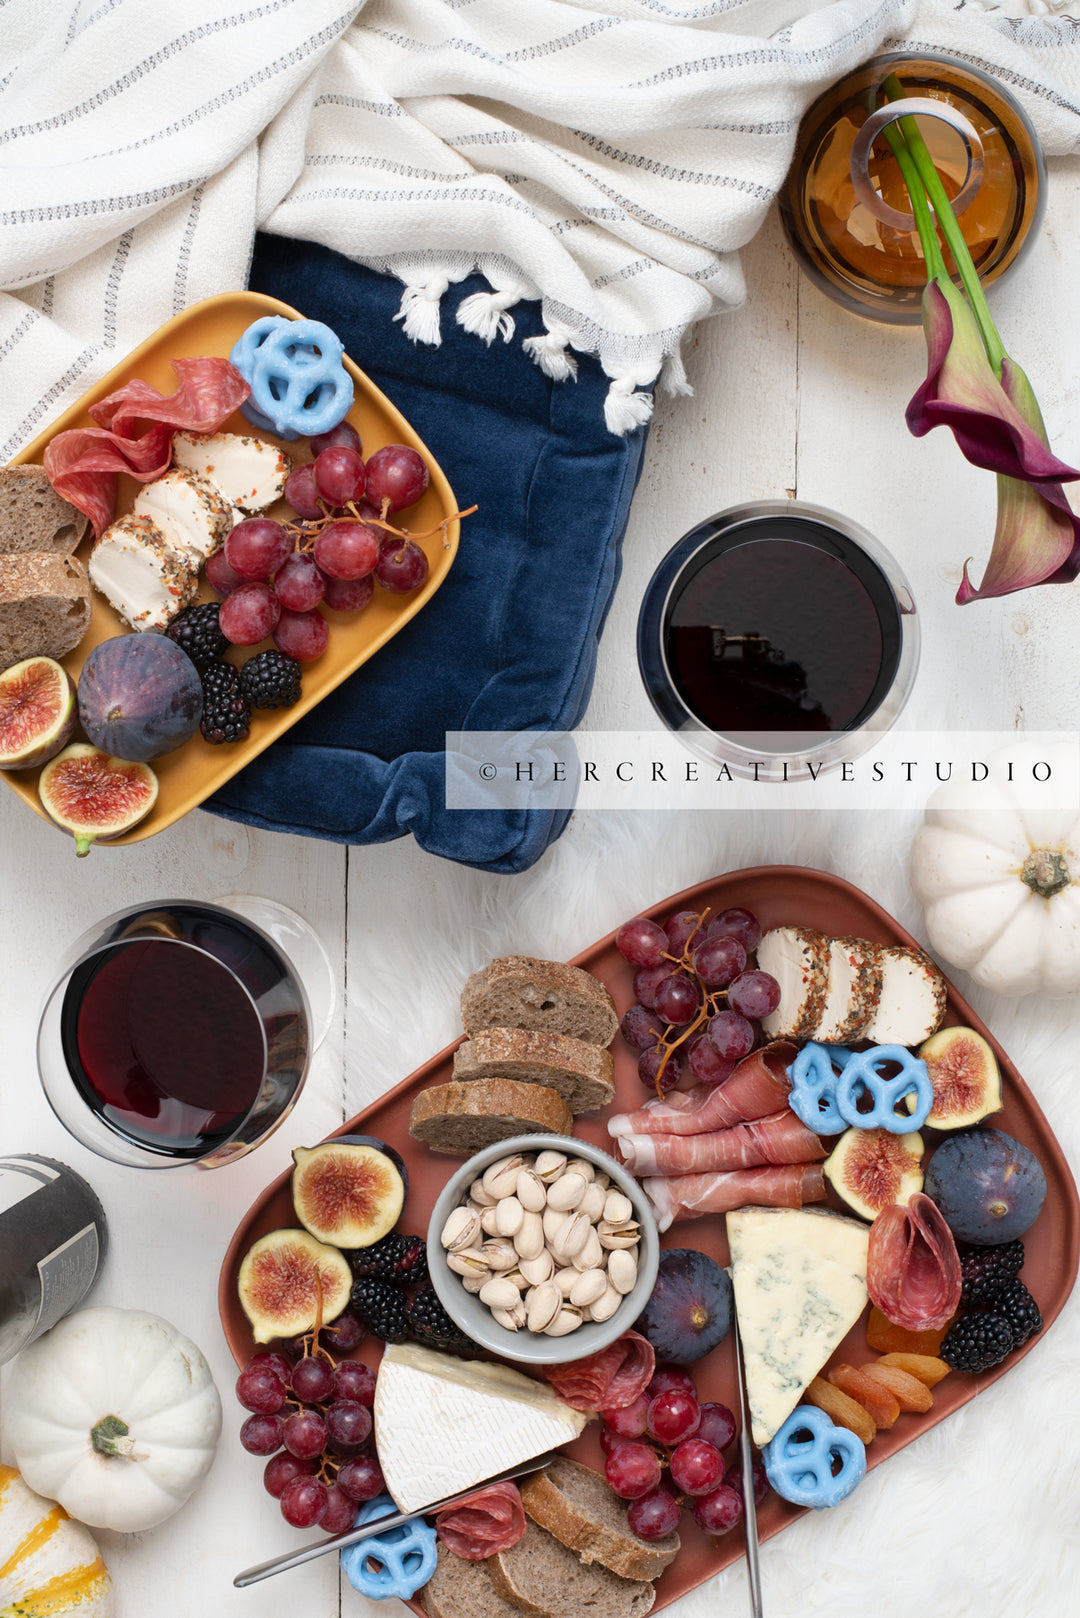 Cheese & Wine Spread, Styled Stock Image